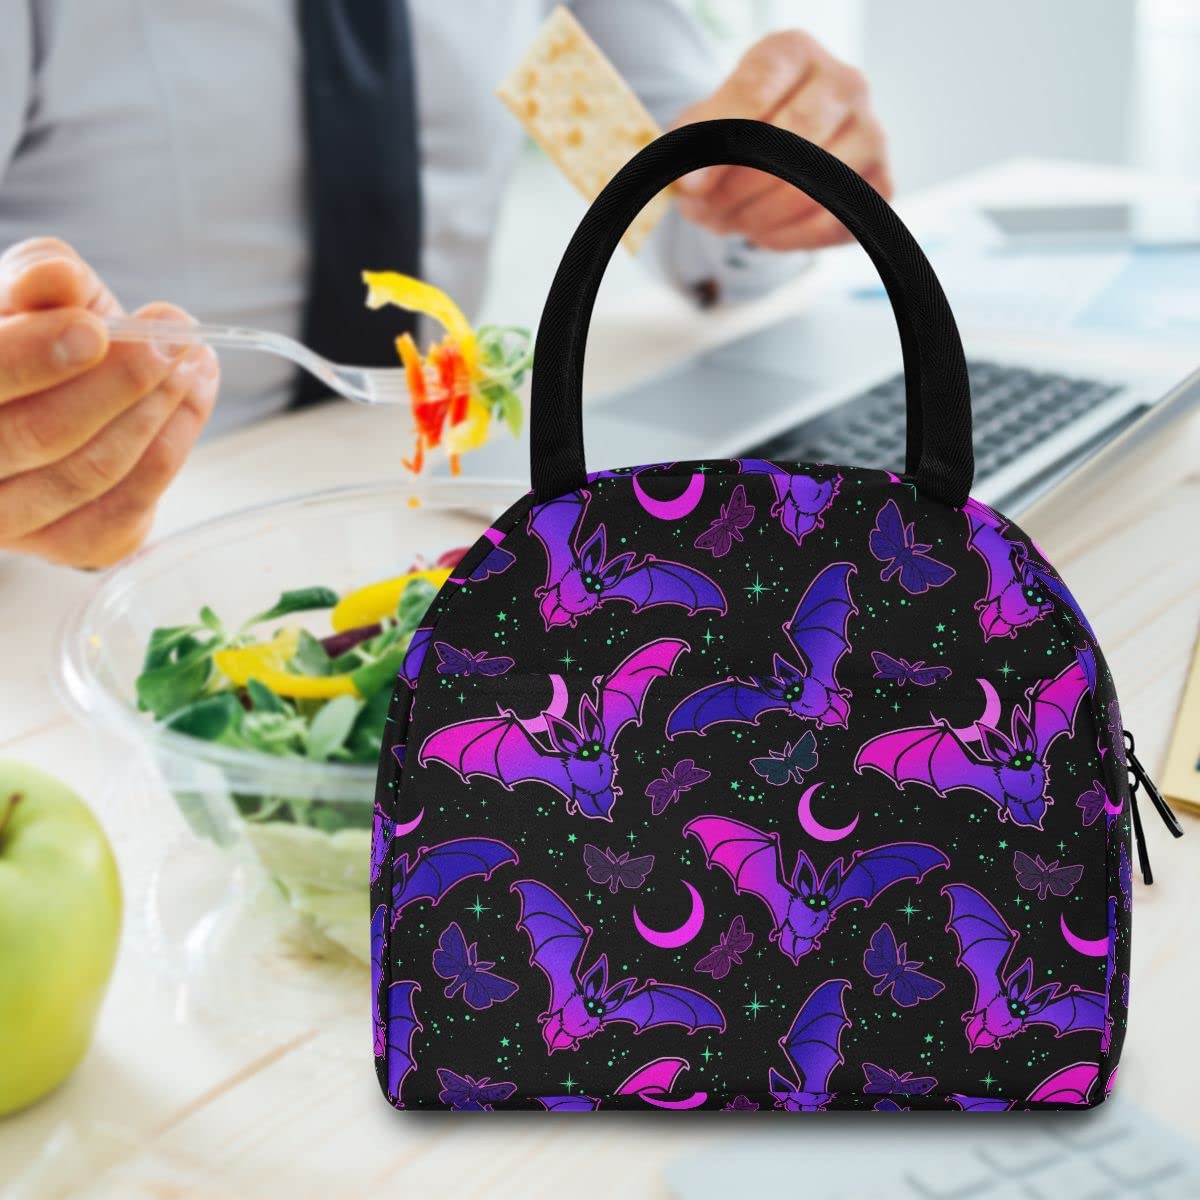 MNSRUU Lunch Bag Women Men, Purple Bat Gothic Portable Insulated Lunch Bag Reusable Thermal Meal Tote Cooler Bag Organizer for Adult Work with Handle